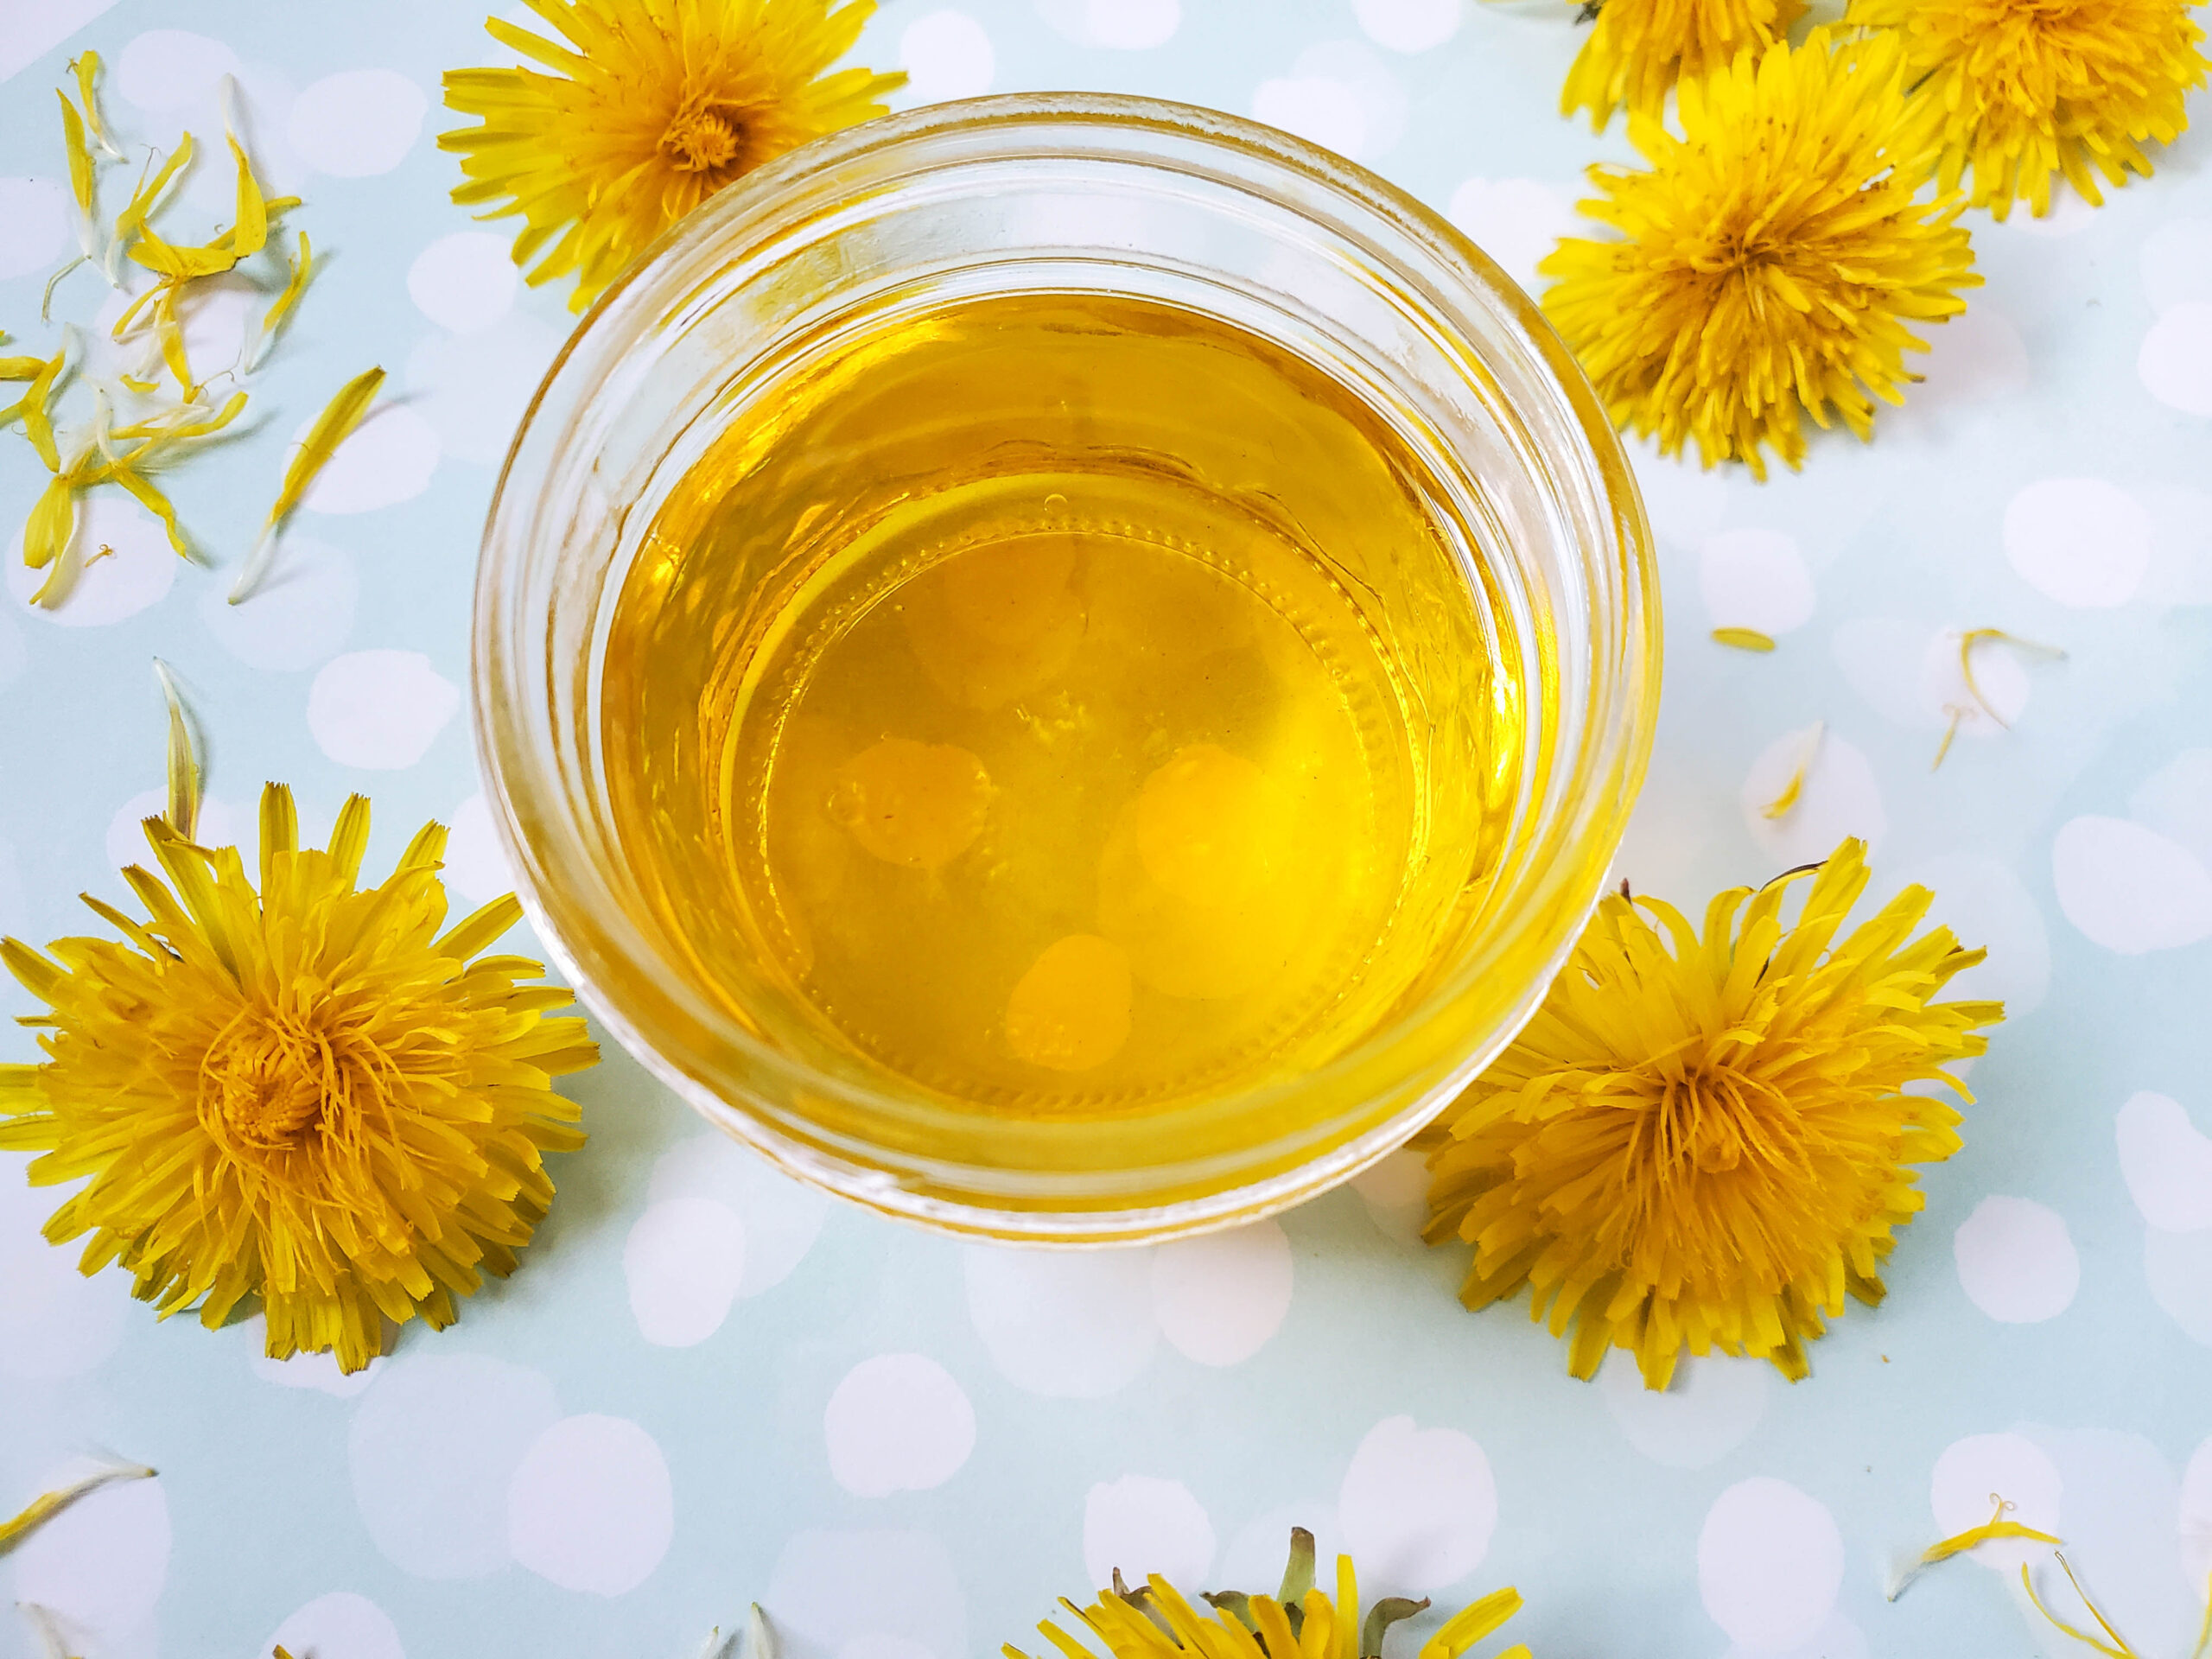 Learn how to make dandelion oil in this super easy diy tutorial